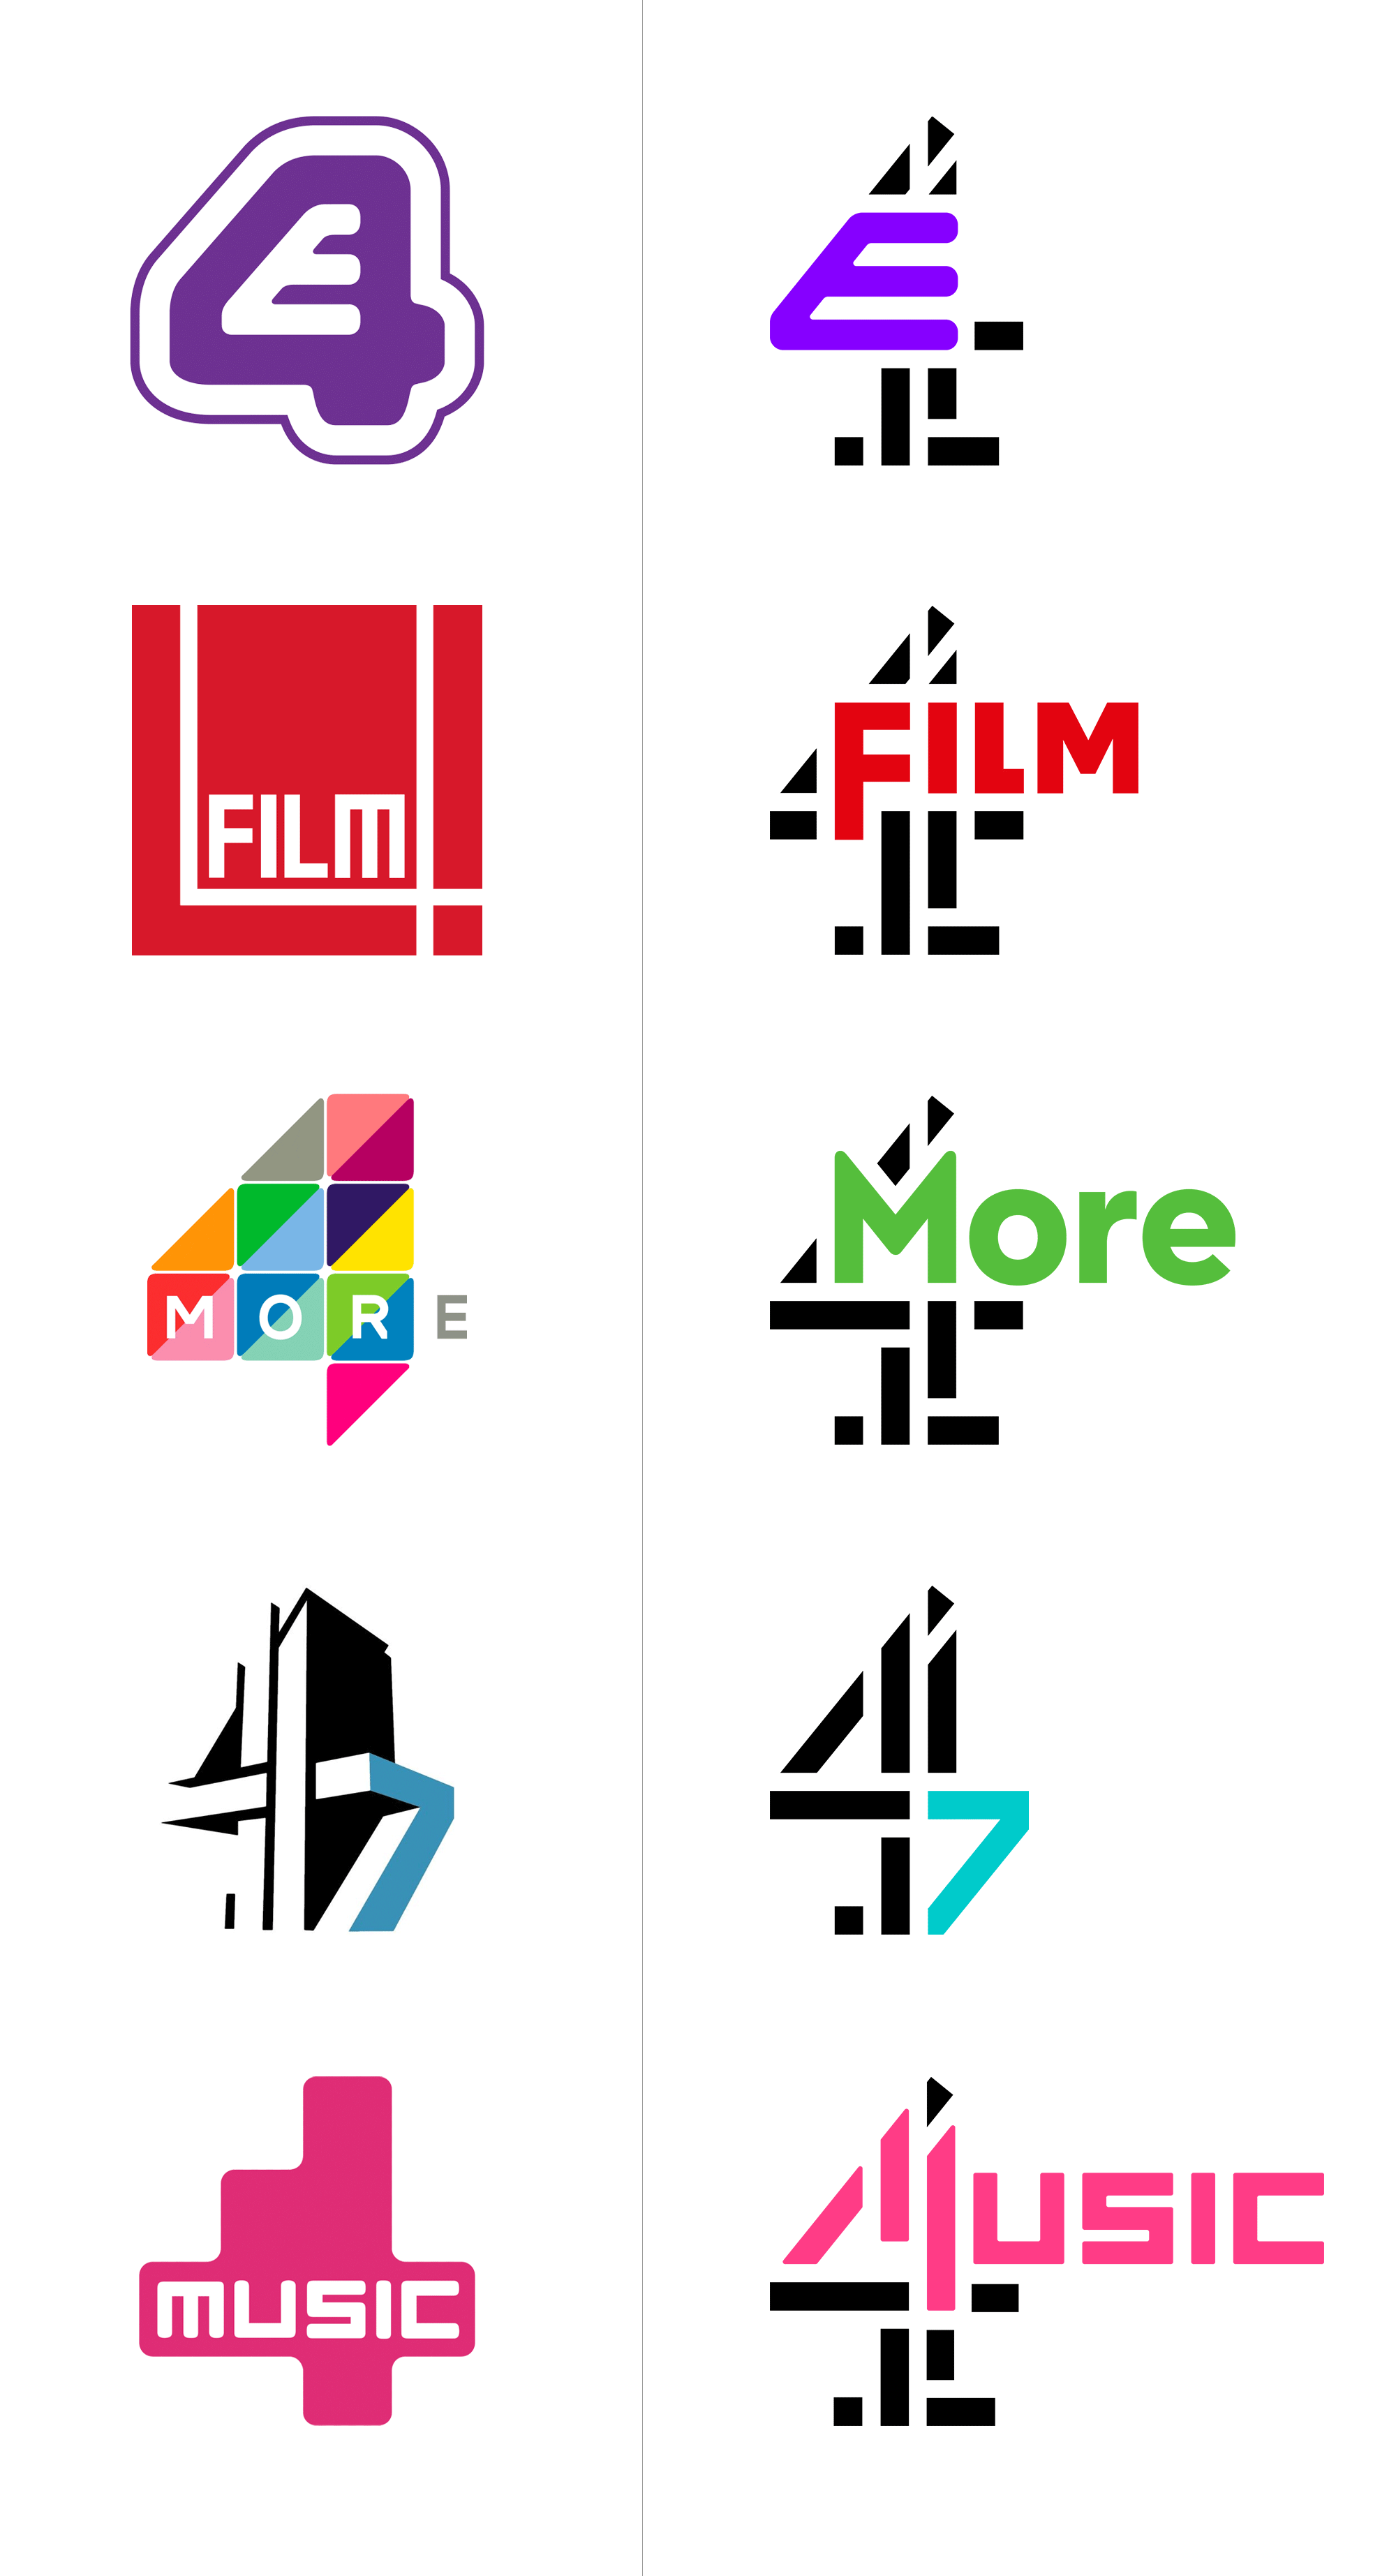 Channel 4 Logo - Brand New: New Logos for all Channel 4 by 4creative and ManvsMachine